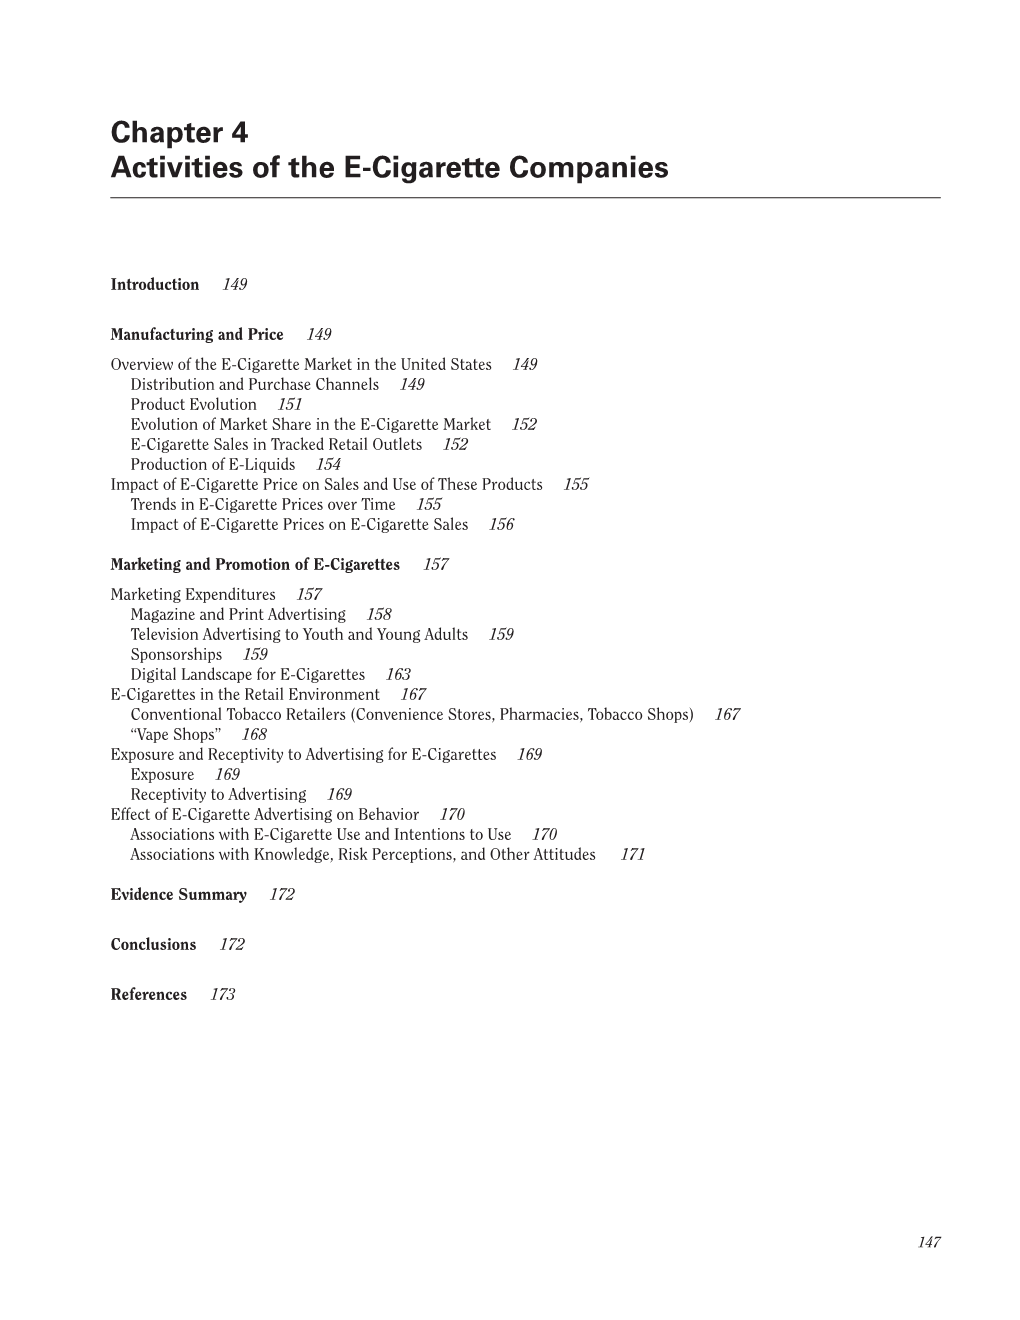 Chapter 4. Activities of the E-Cigarette Companies